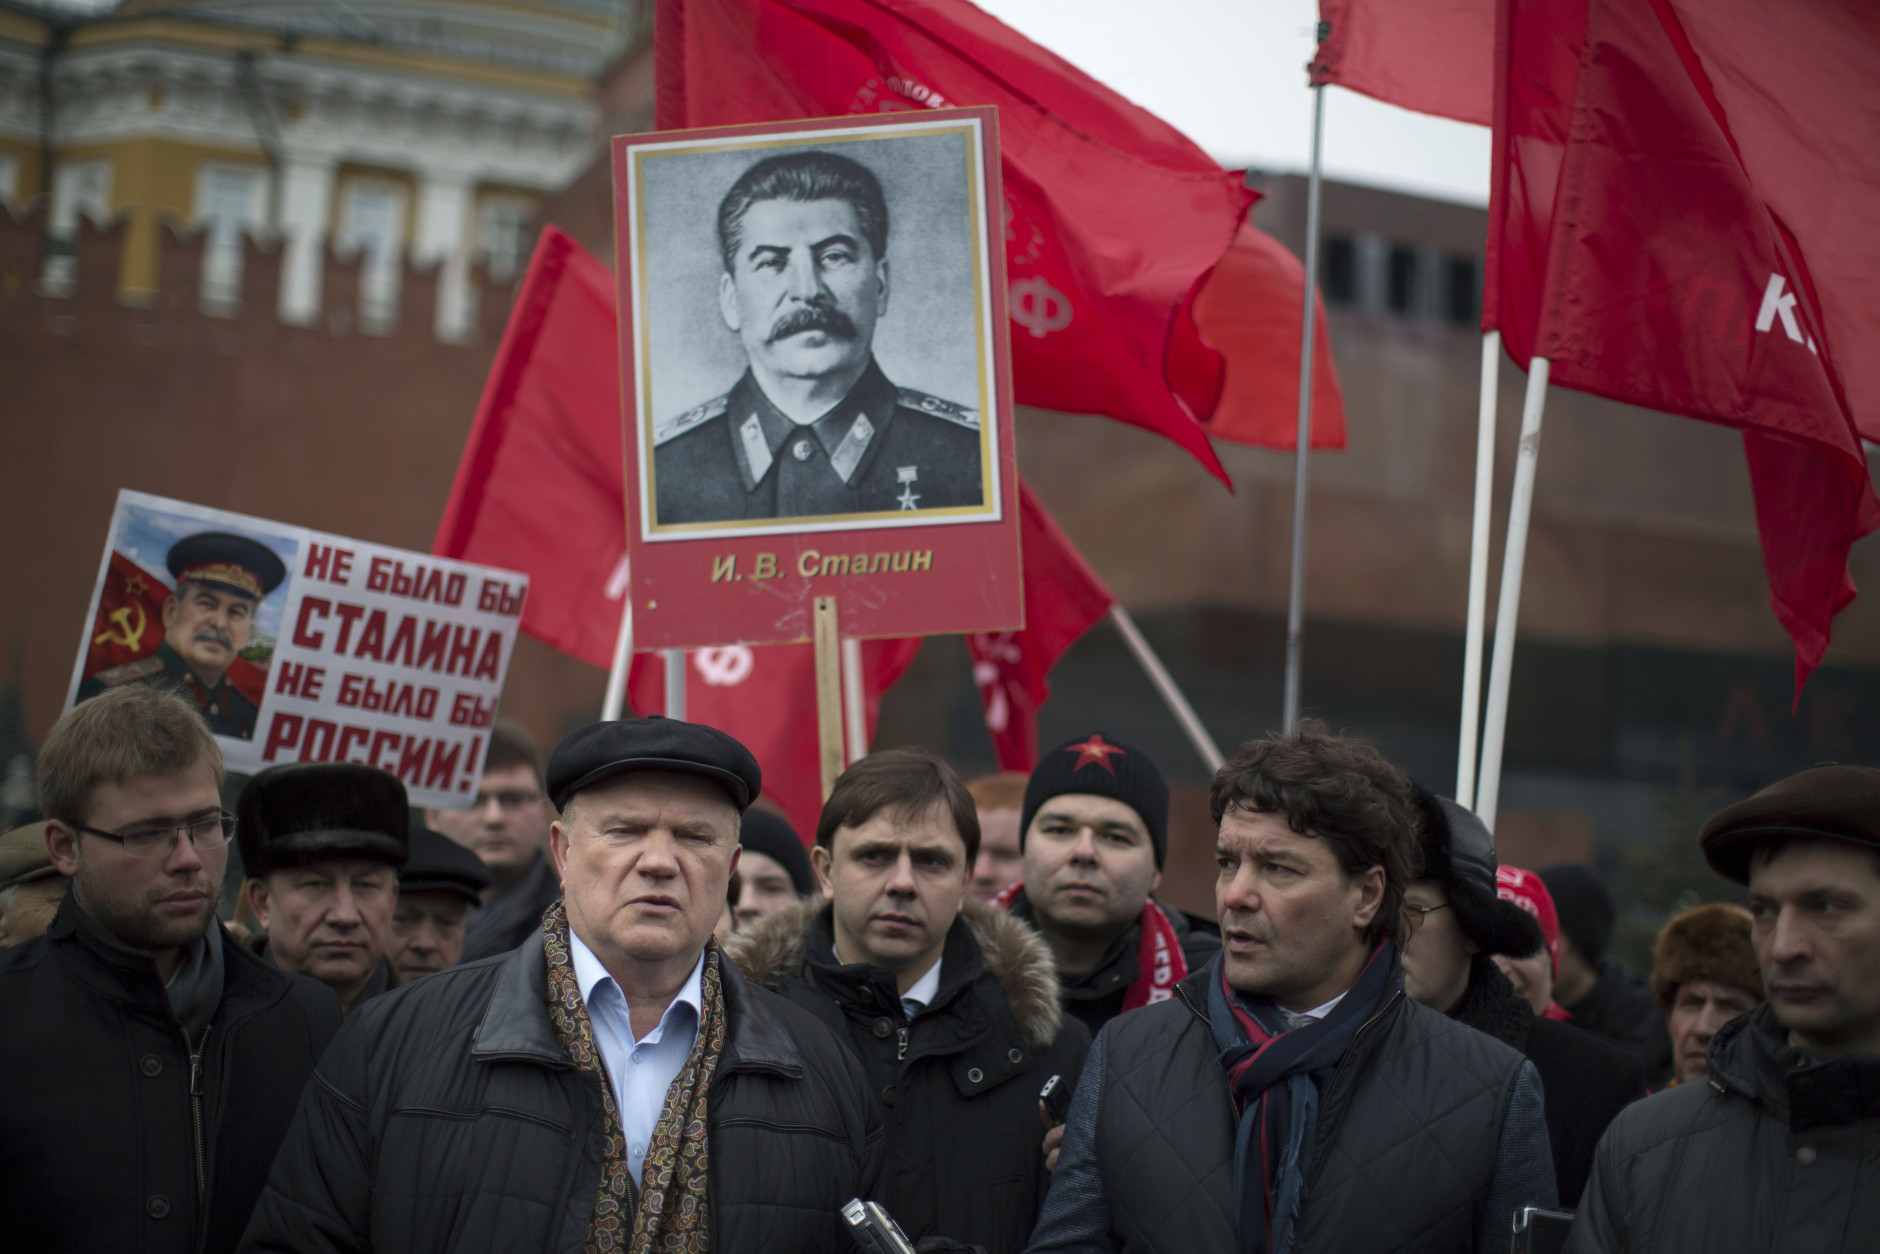 Russian Communist Party leader and lawmaker Gennady Zyuganov, foreground left, speaks to the media as communist party supporters holds portraits of Soviet dictator Josef Stalin and red flags marking the 61st anniversary of his death in Red Square in Moscow, Russia, Wednesday, March 5, 2014.  Stalin led the Soviet Union from 1924 until his death in 1953. Communists credit him with leading the country to victory in World War II while others condemn the brutal purges that killed millions. The sign at left reads "without Stalin there could not be Russia." (AP Photo/Alexander Zemlianichenko)